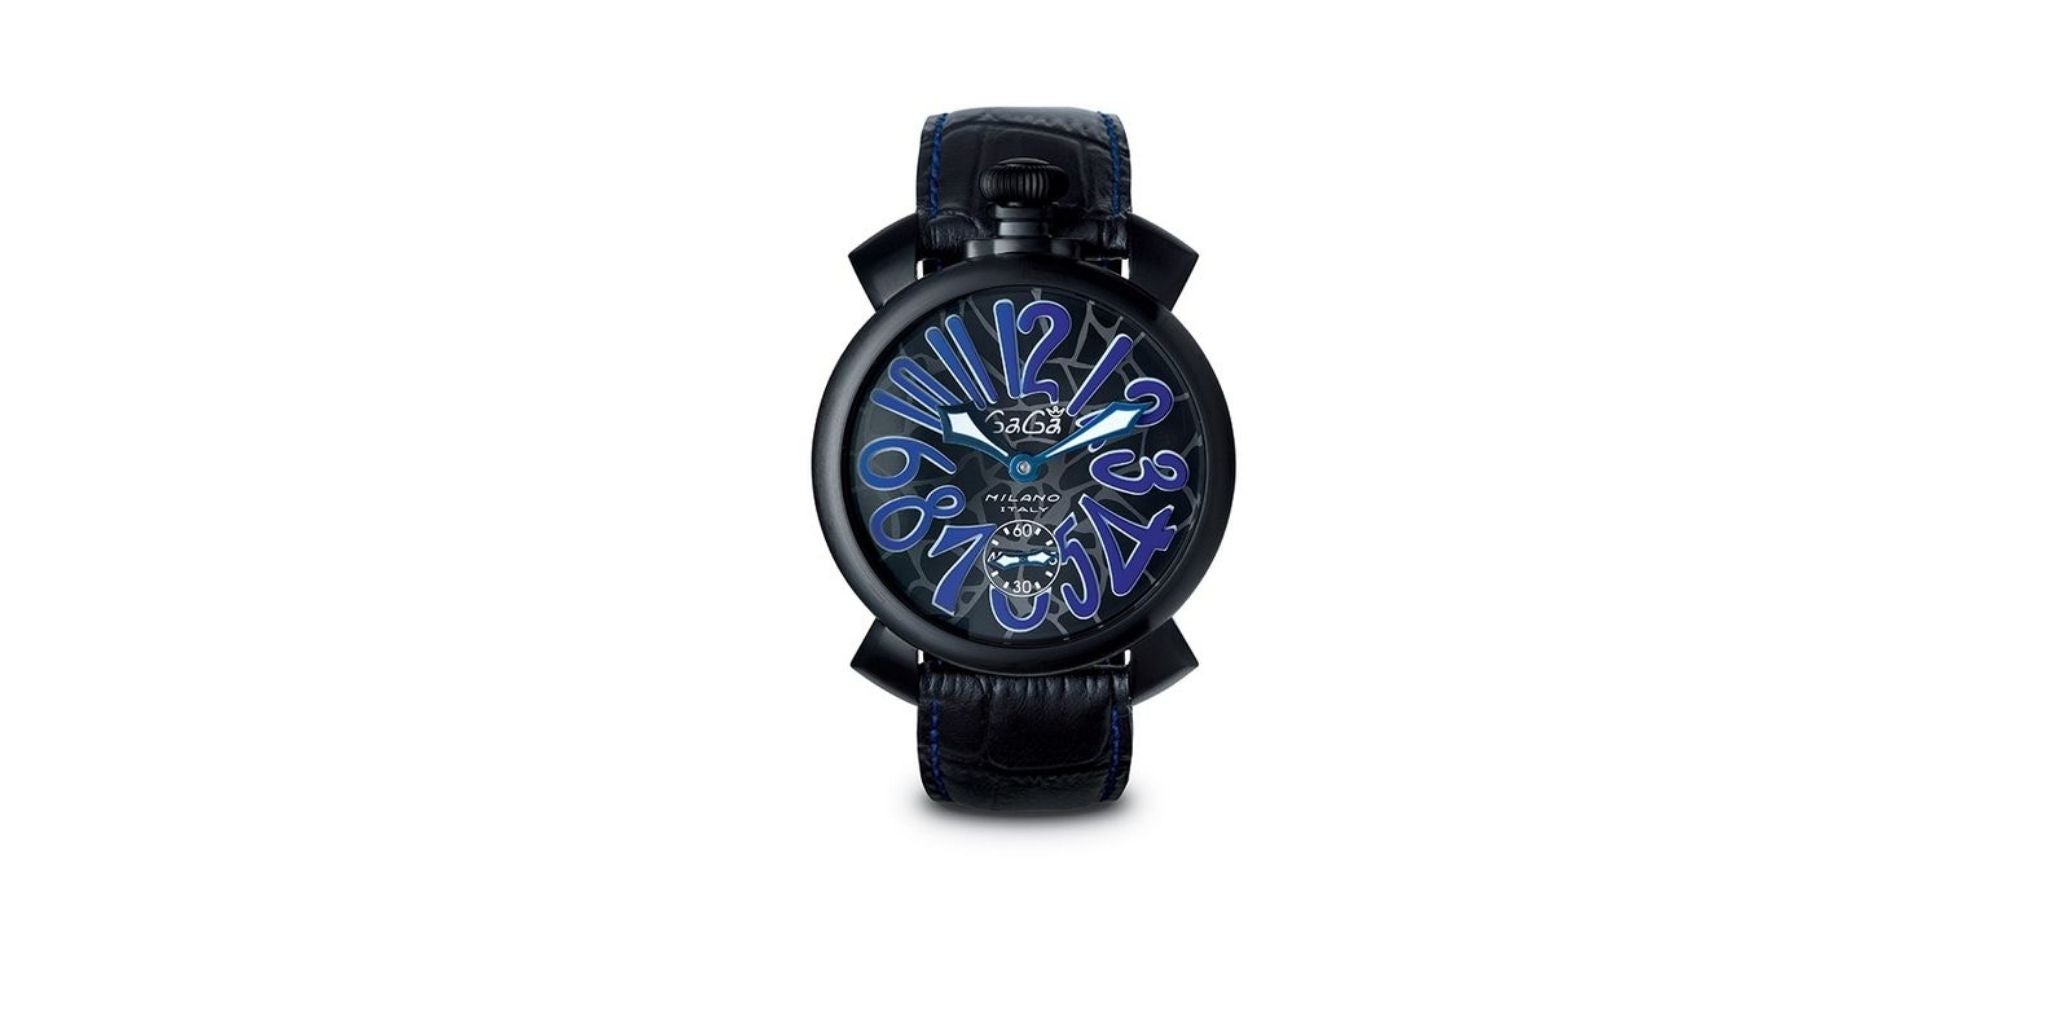 Now is the time to pick up a stylish watch by GaGa Milano 